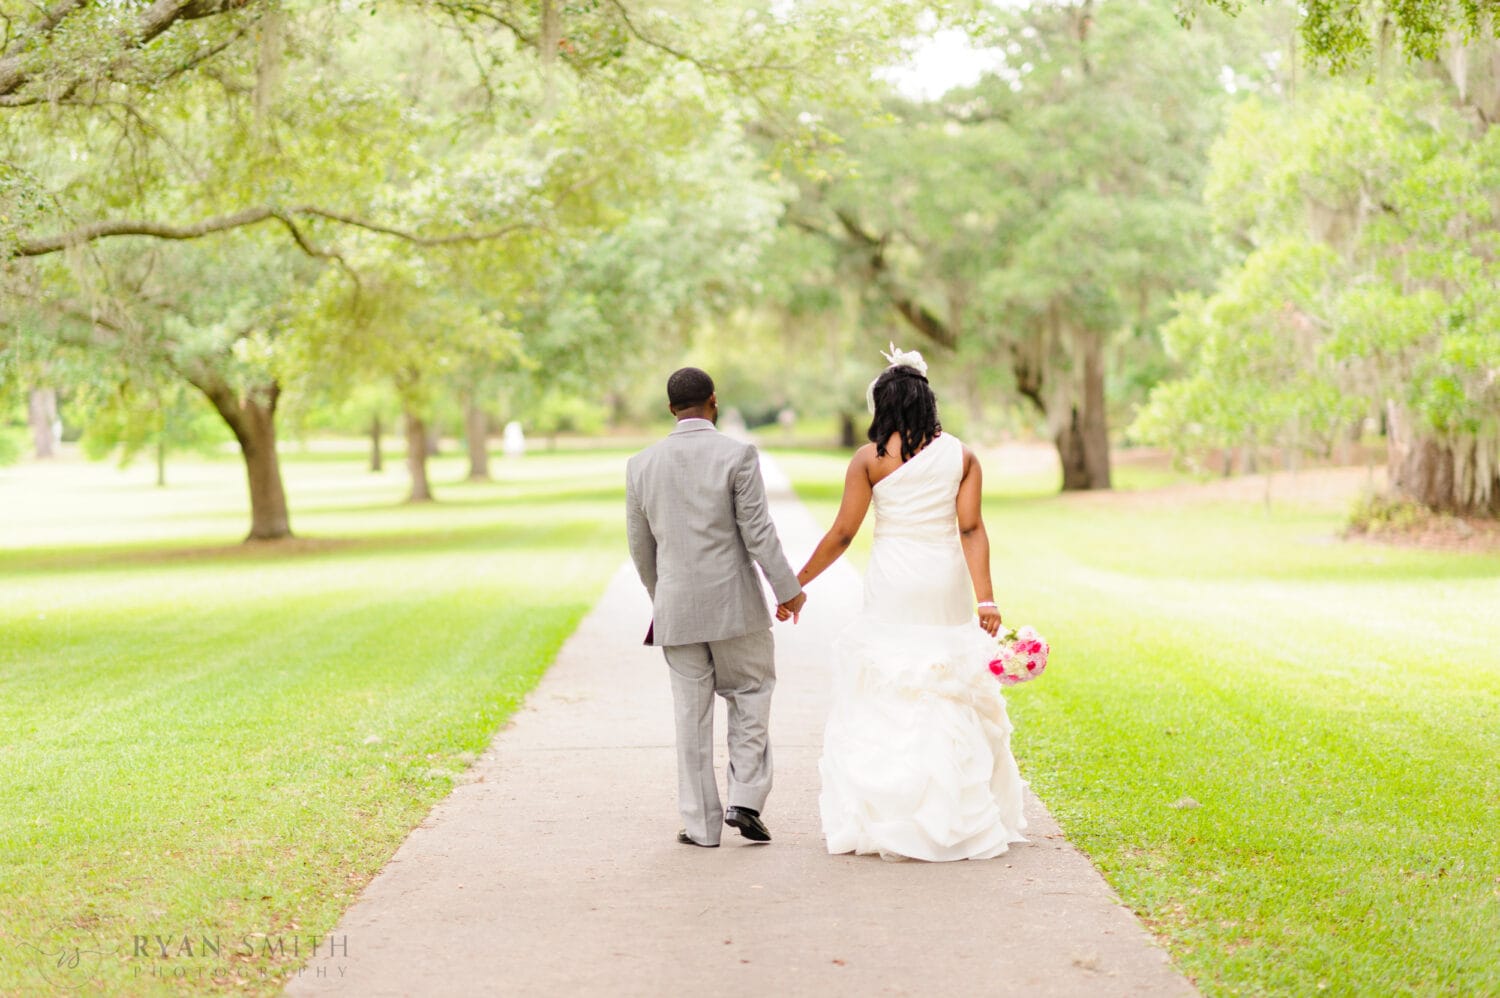 Portraits with the bride and groom - Brookgreen Gardens, Murrells Inlet, SC